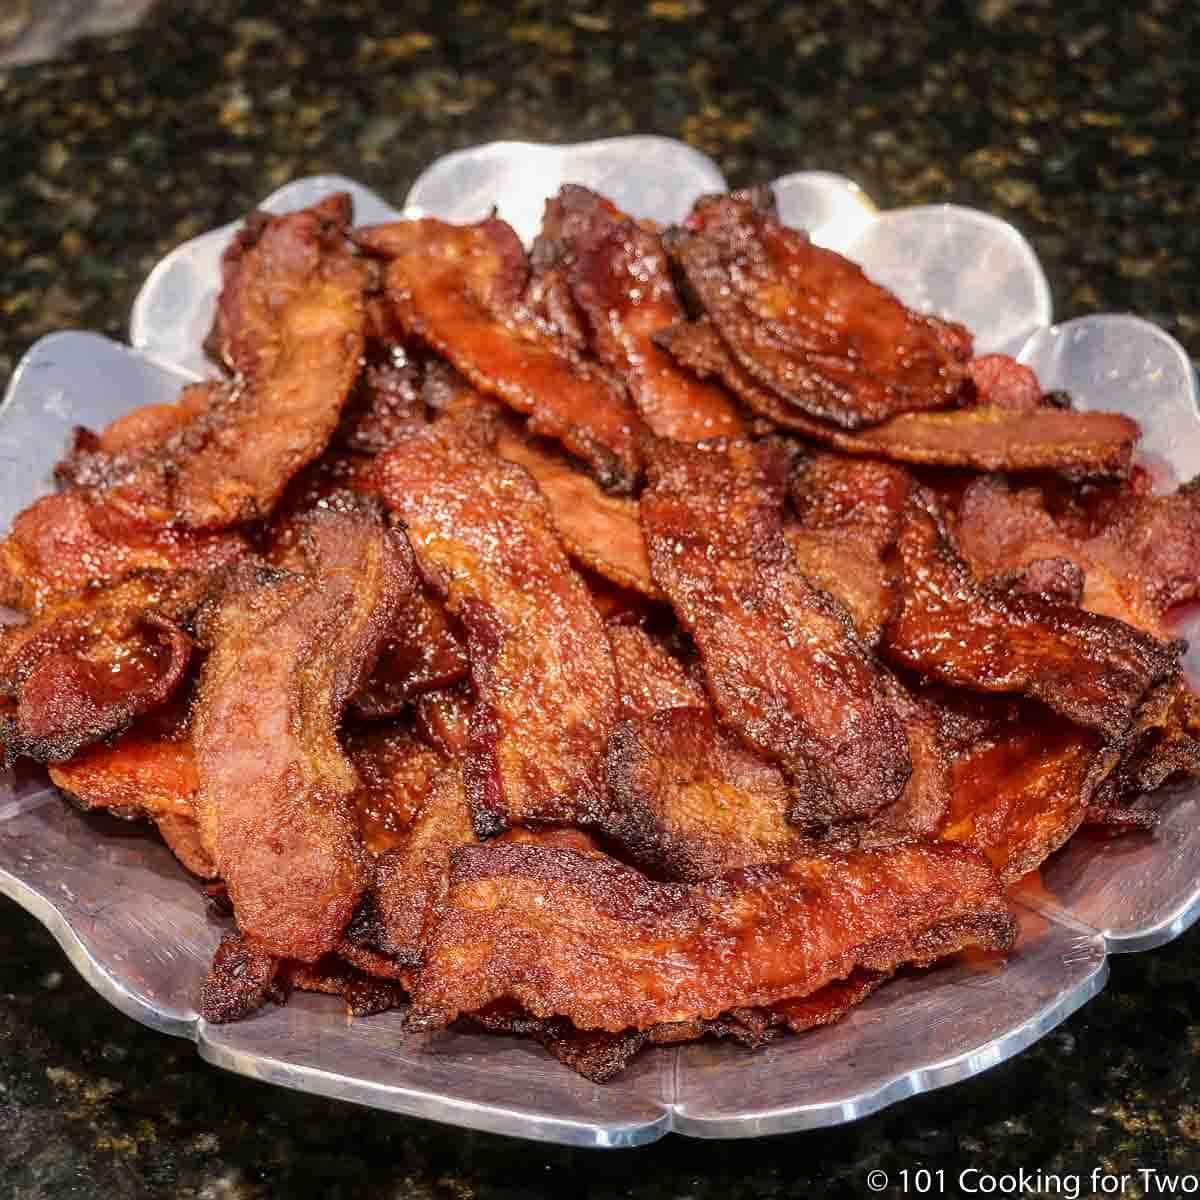 https://www.101cookingfortwo.com/wp-content/uploads/2022/11/candied-bacon-on-a-tray.jpg